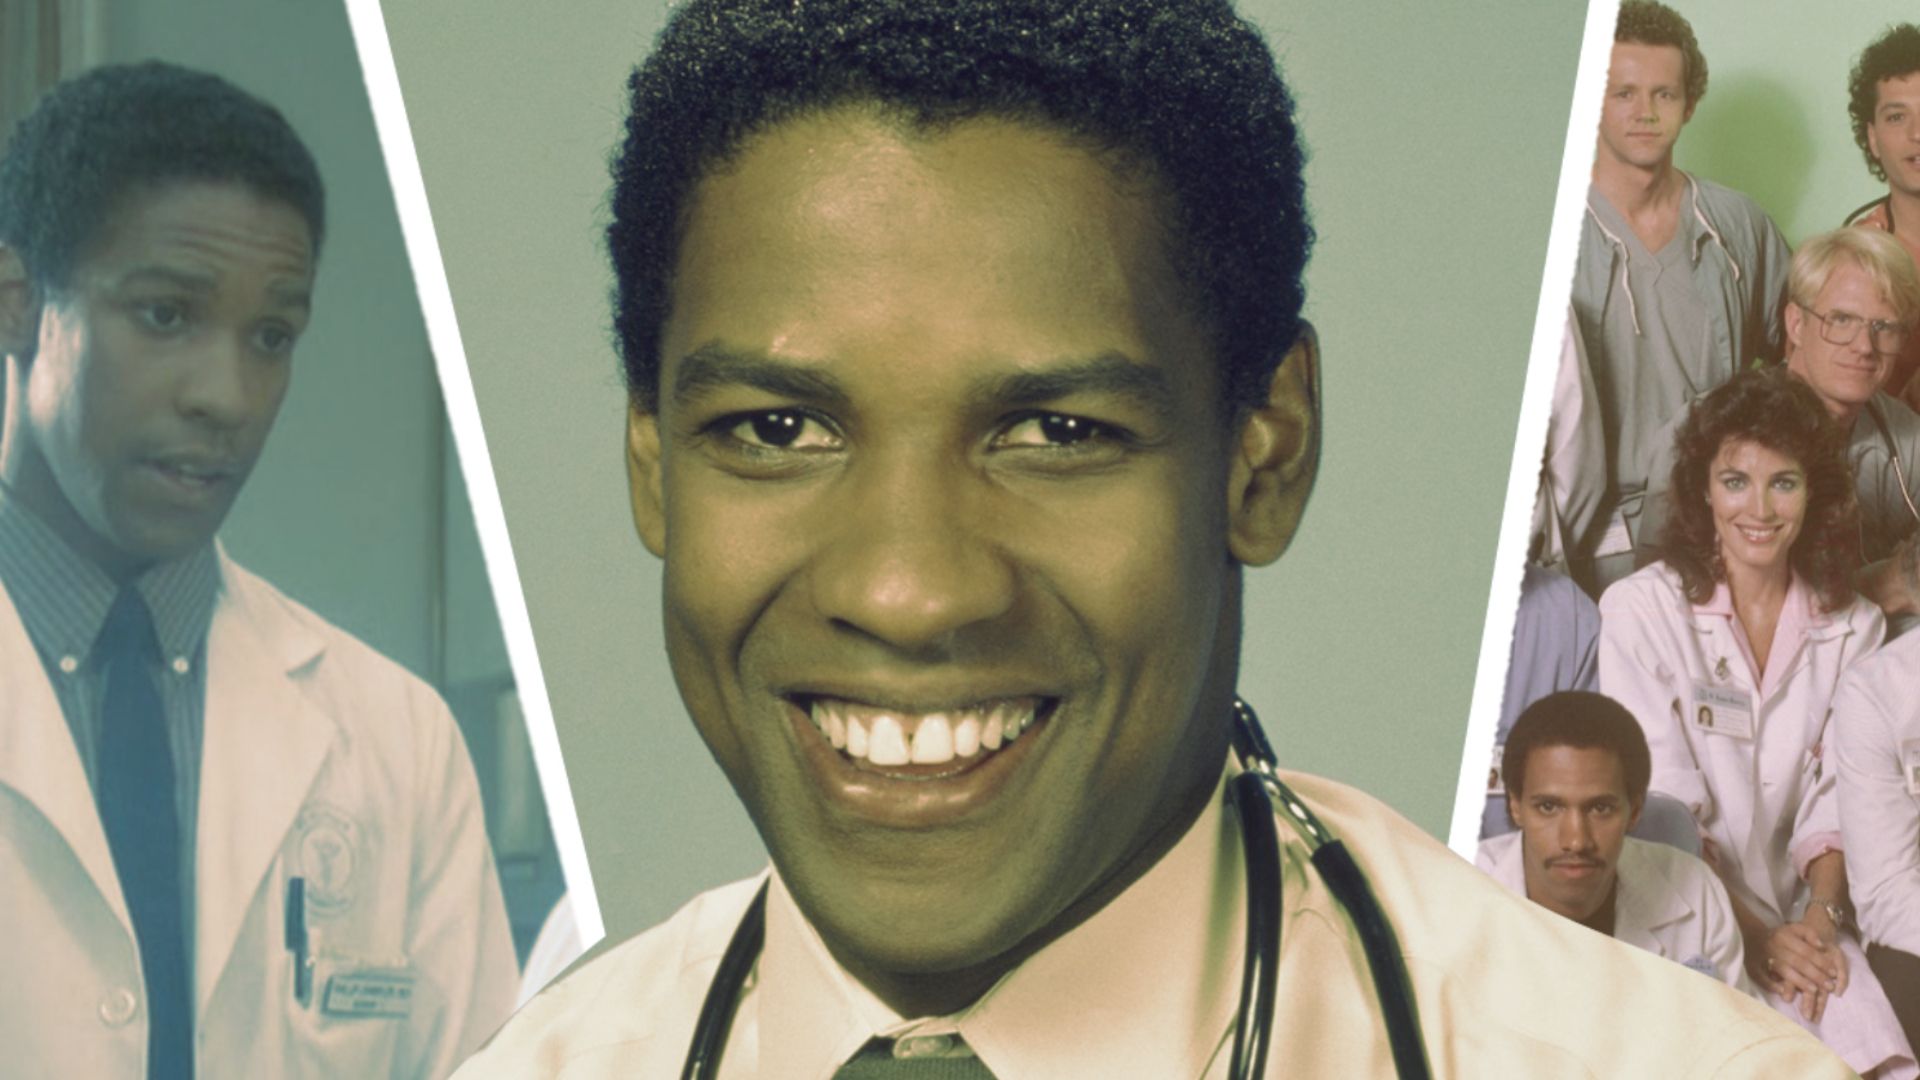 An edited image of Denzel Washington as Dr. Philip Chandler in a white dress and collared shirt in St. Elsewhere